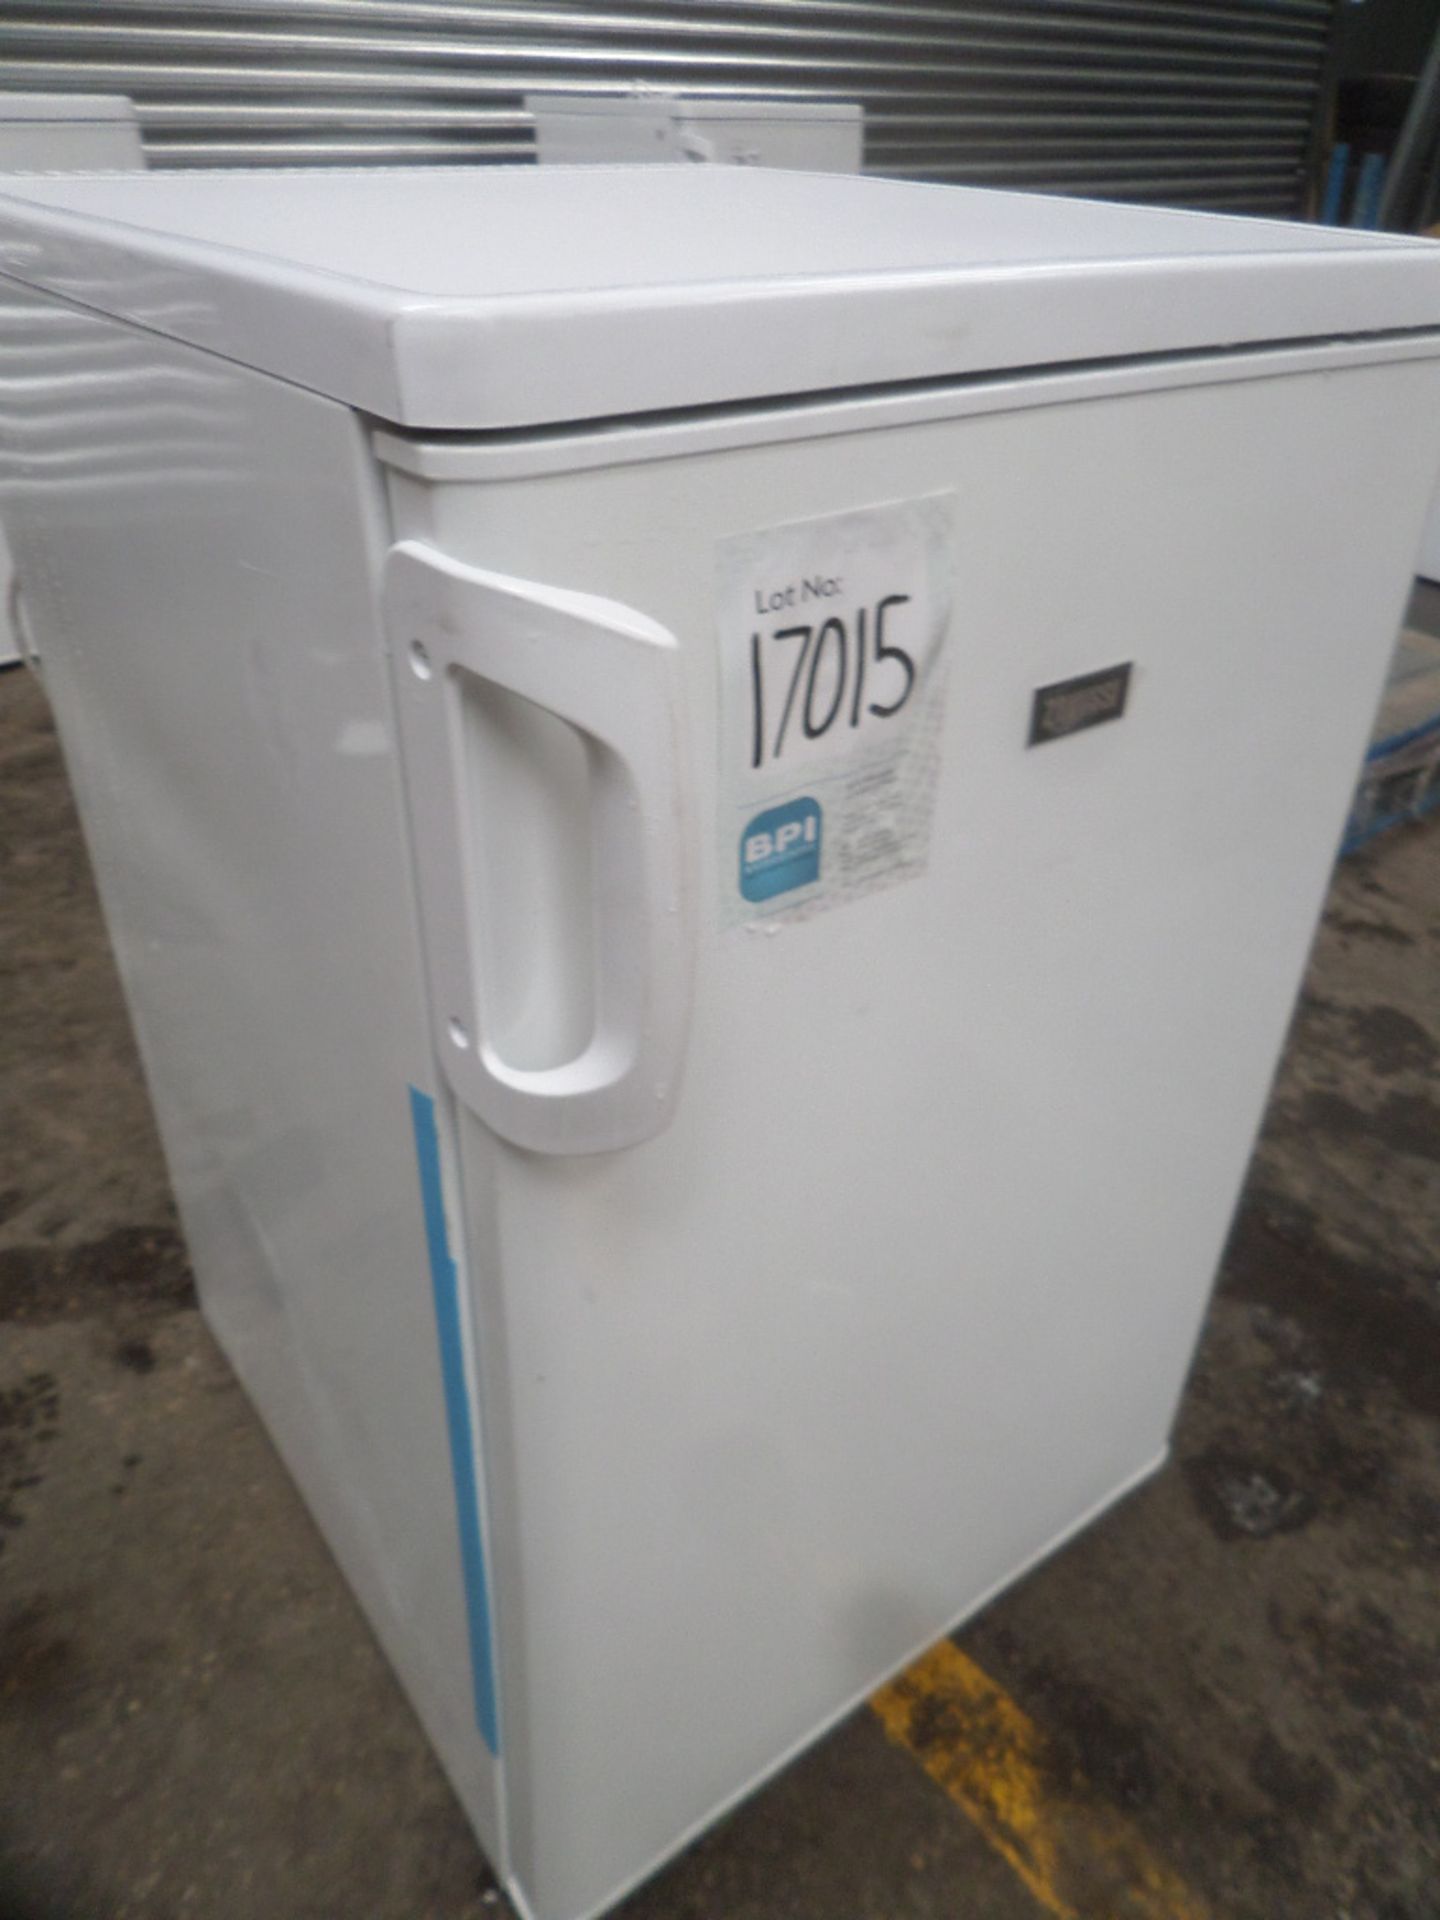 ZANUSSI TT150-4S {017015} FRIDGE WITH ICE COMPARTMENT 240v 13amp connection - Dimensions 85cmhigh/55